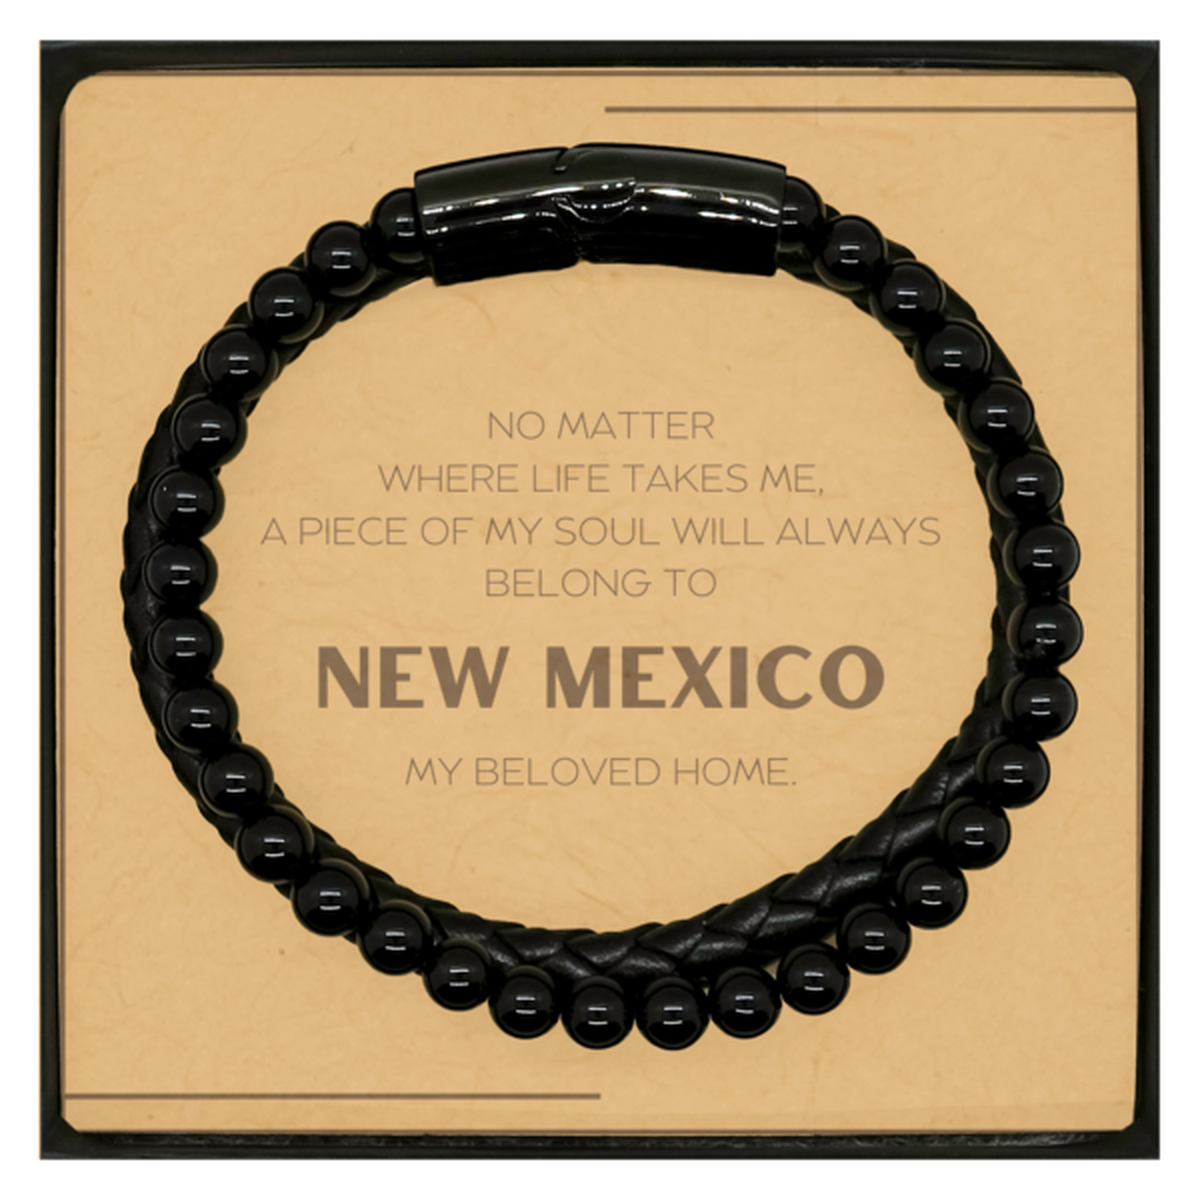 Love New Mexico State Gifts, My soul will always belong to New Mexico, Proud Stone Leather Bracelets, Birthday Christmas Unique Gifts For New Mexico Men, Women, Friends